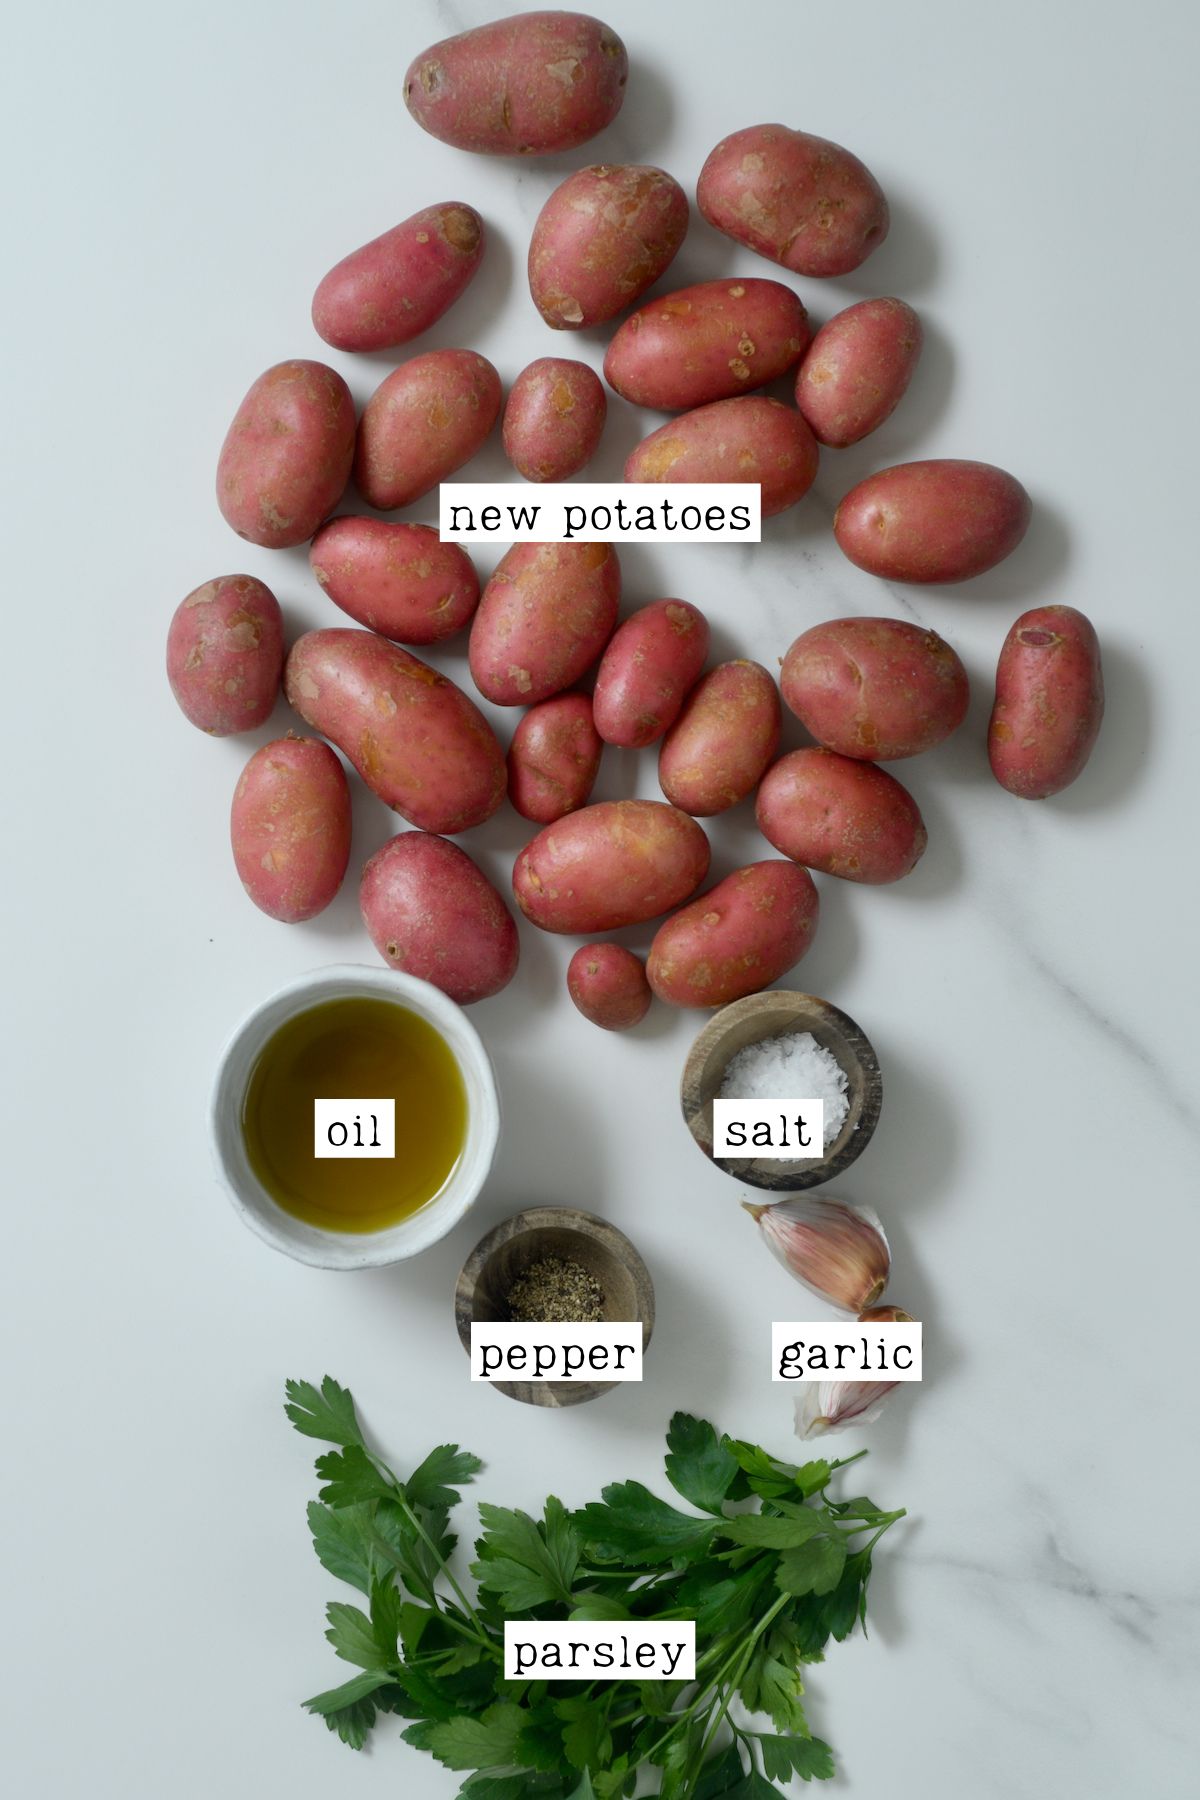 https://www.alphafoodie.com/wp-content/uploads/2022/09/Roasted-New-Red-Potatoes-Ingredients-for-oven-roasted-new-potatoes.jpeg